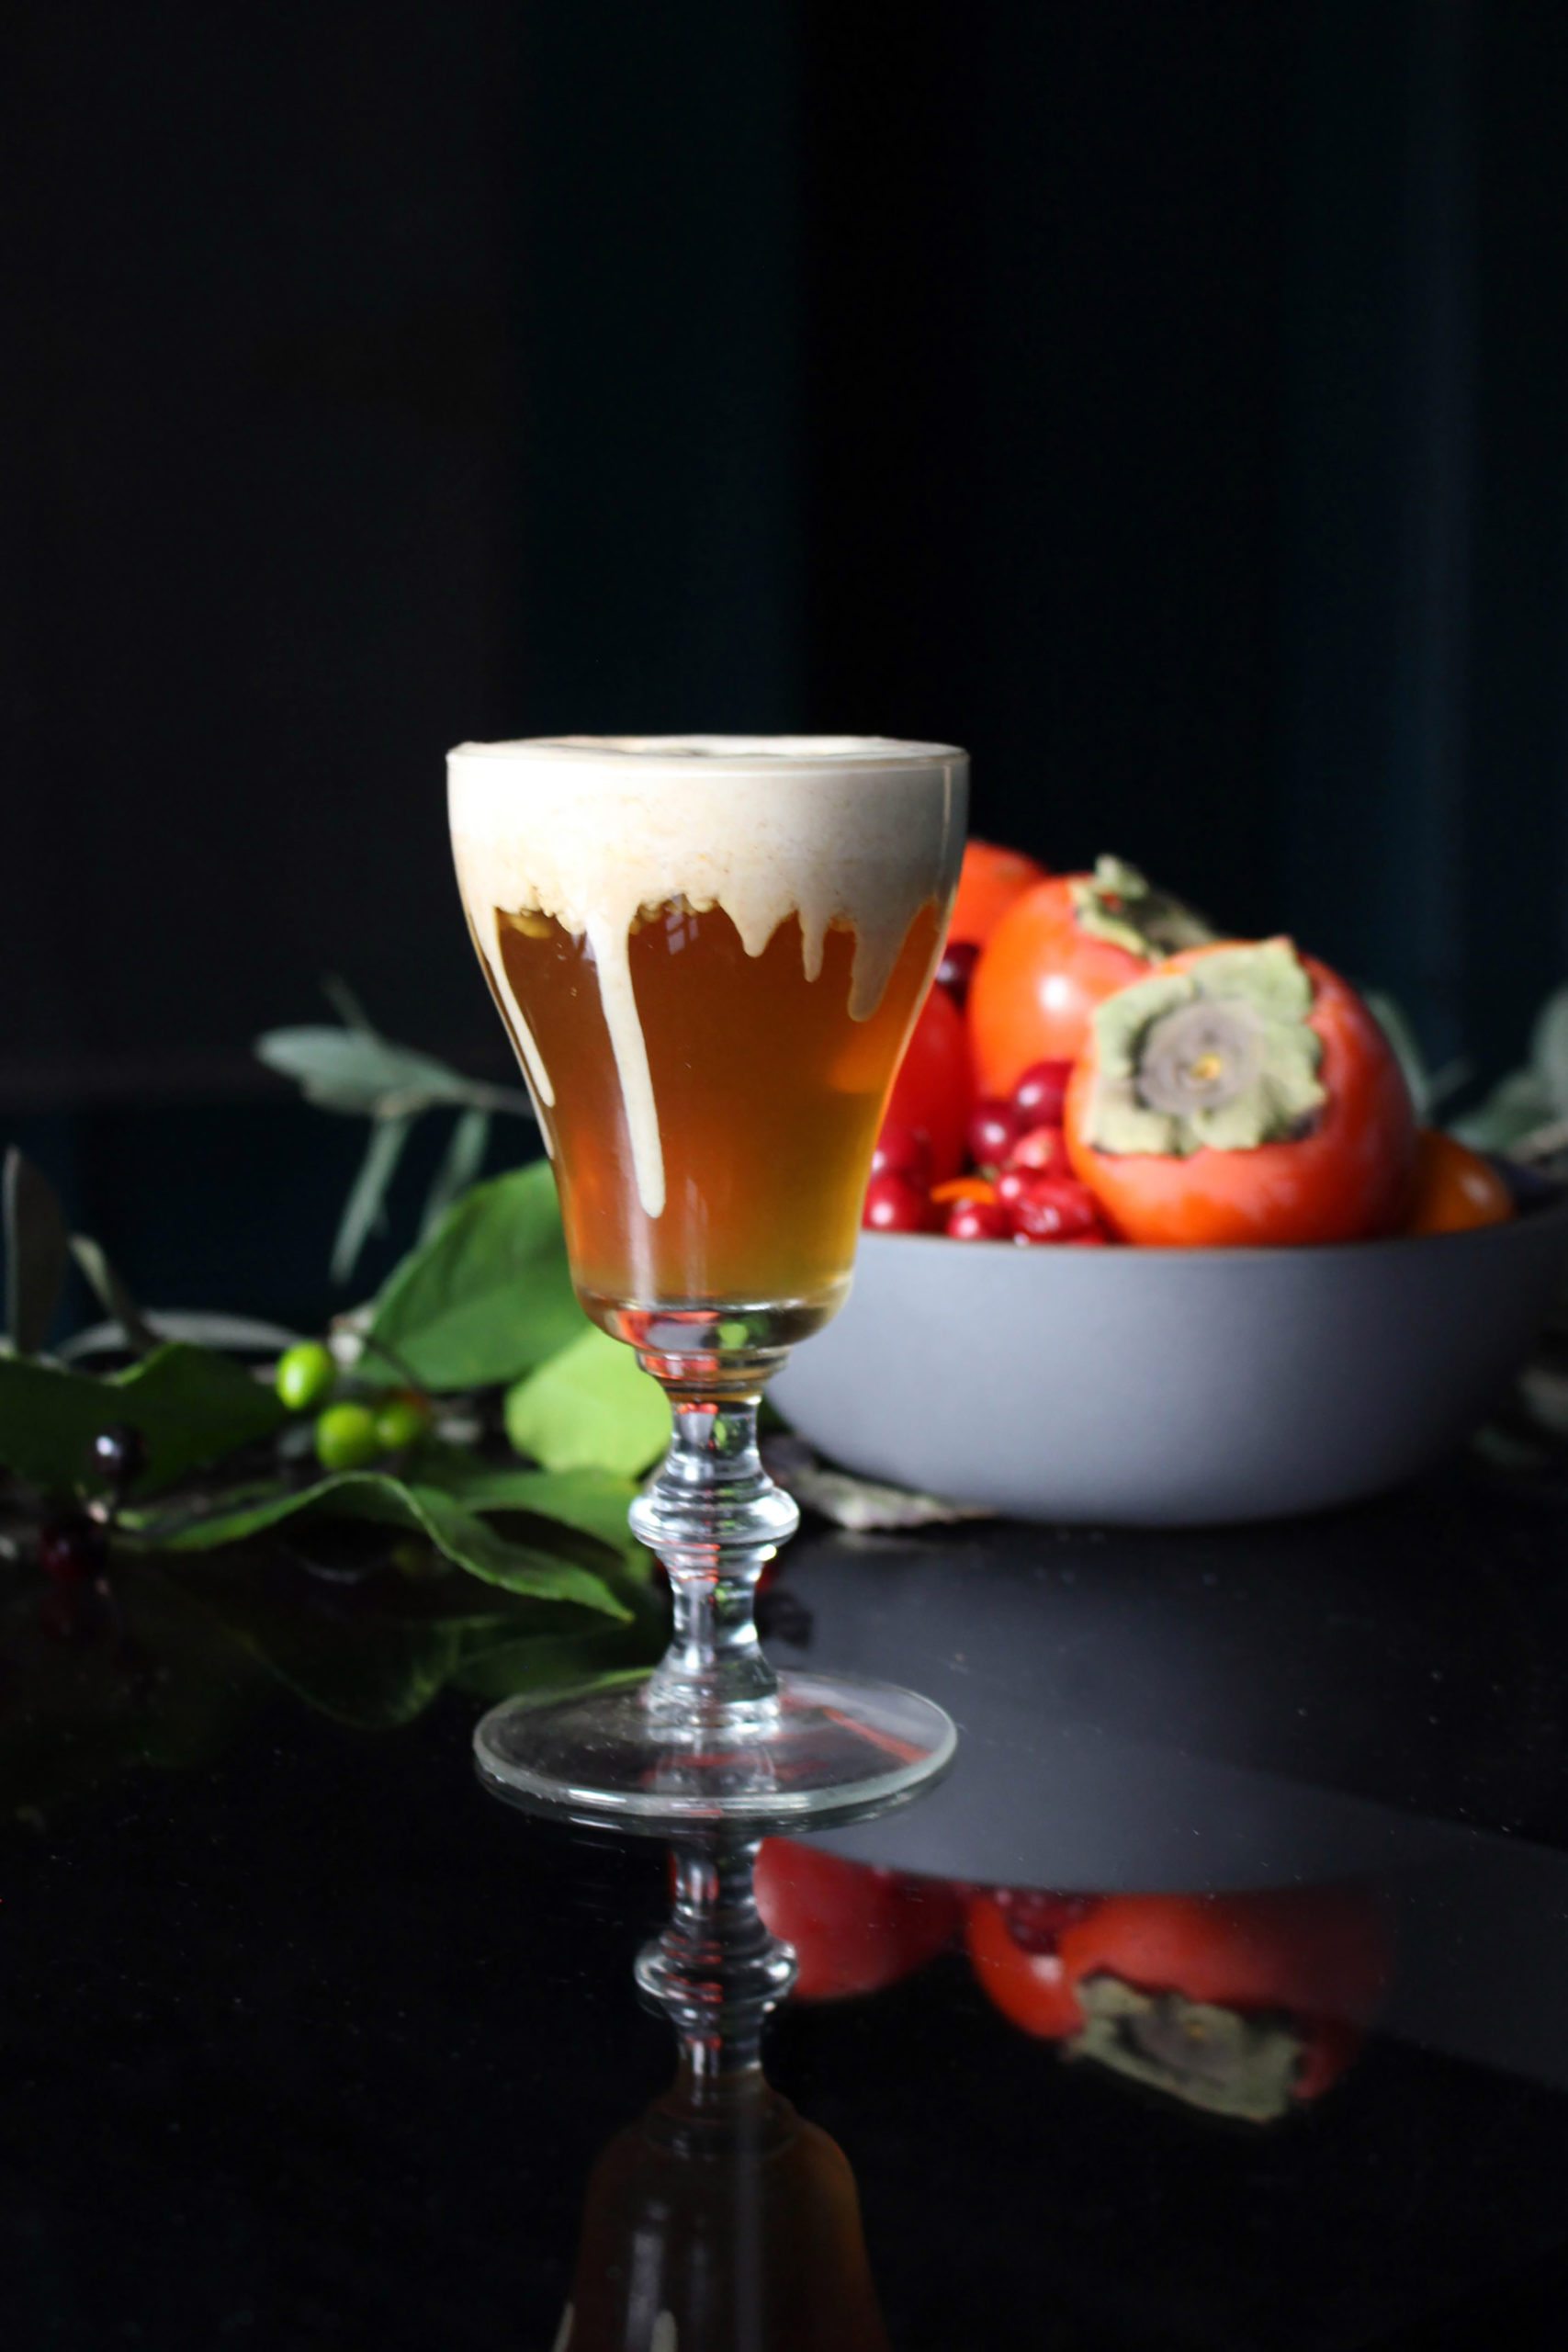 foam dripping down cocktail dramatically with persimmon in background